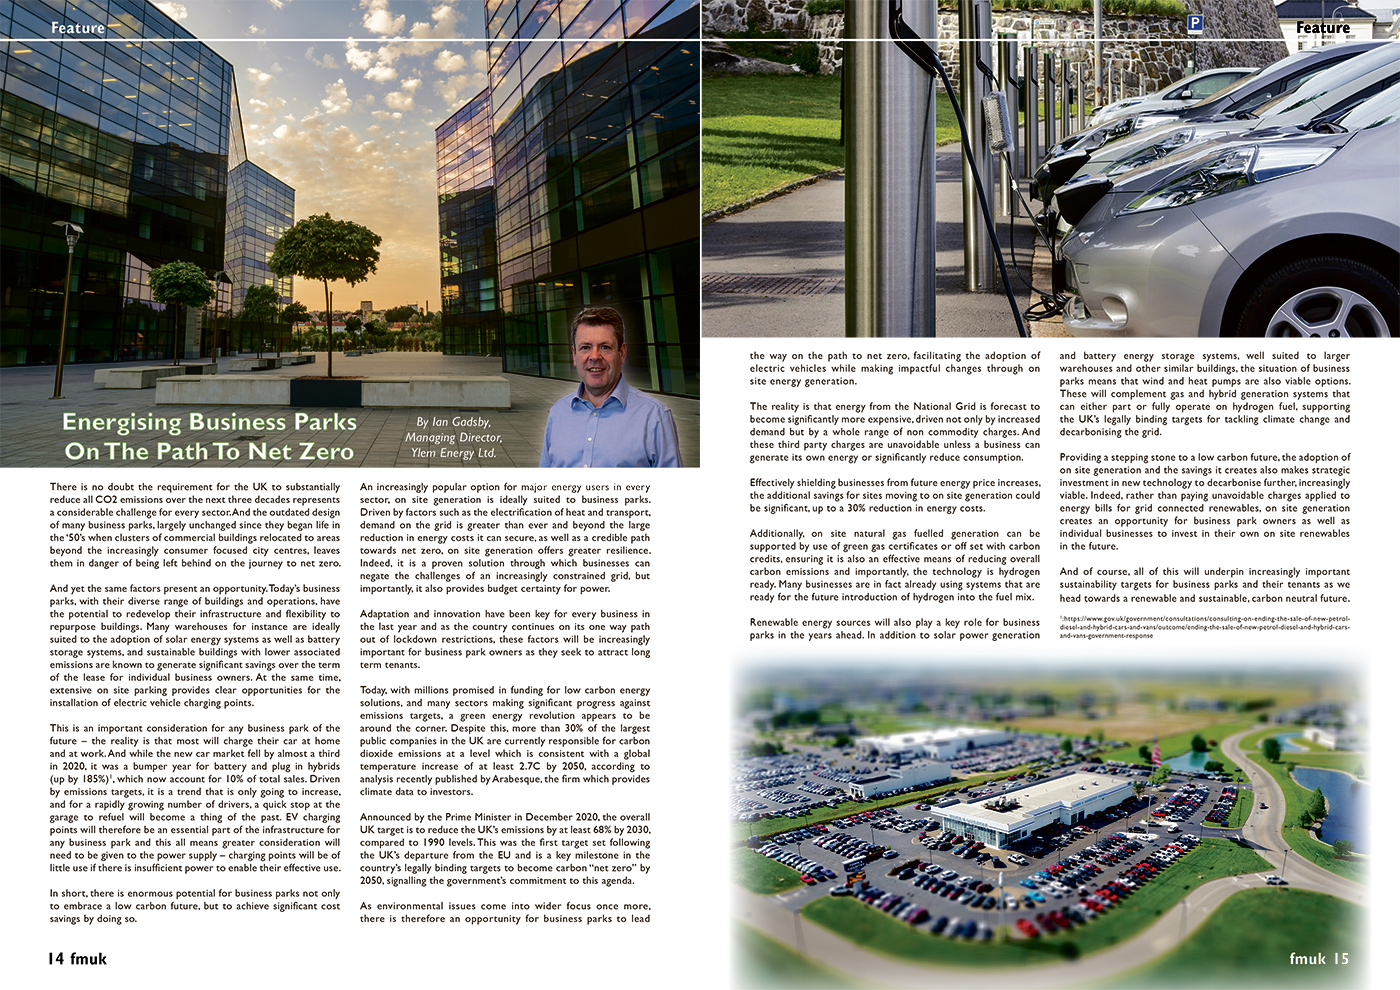 Energising Business Parks On The Path To Net Zero